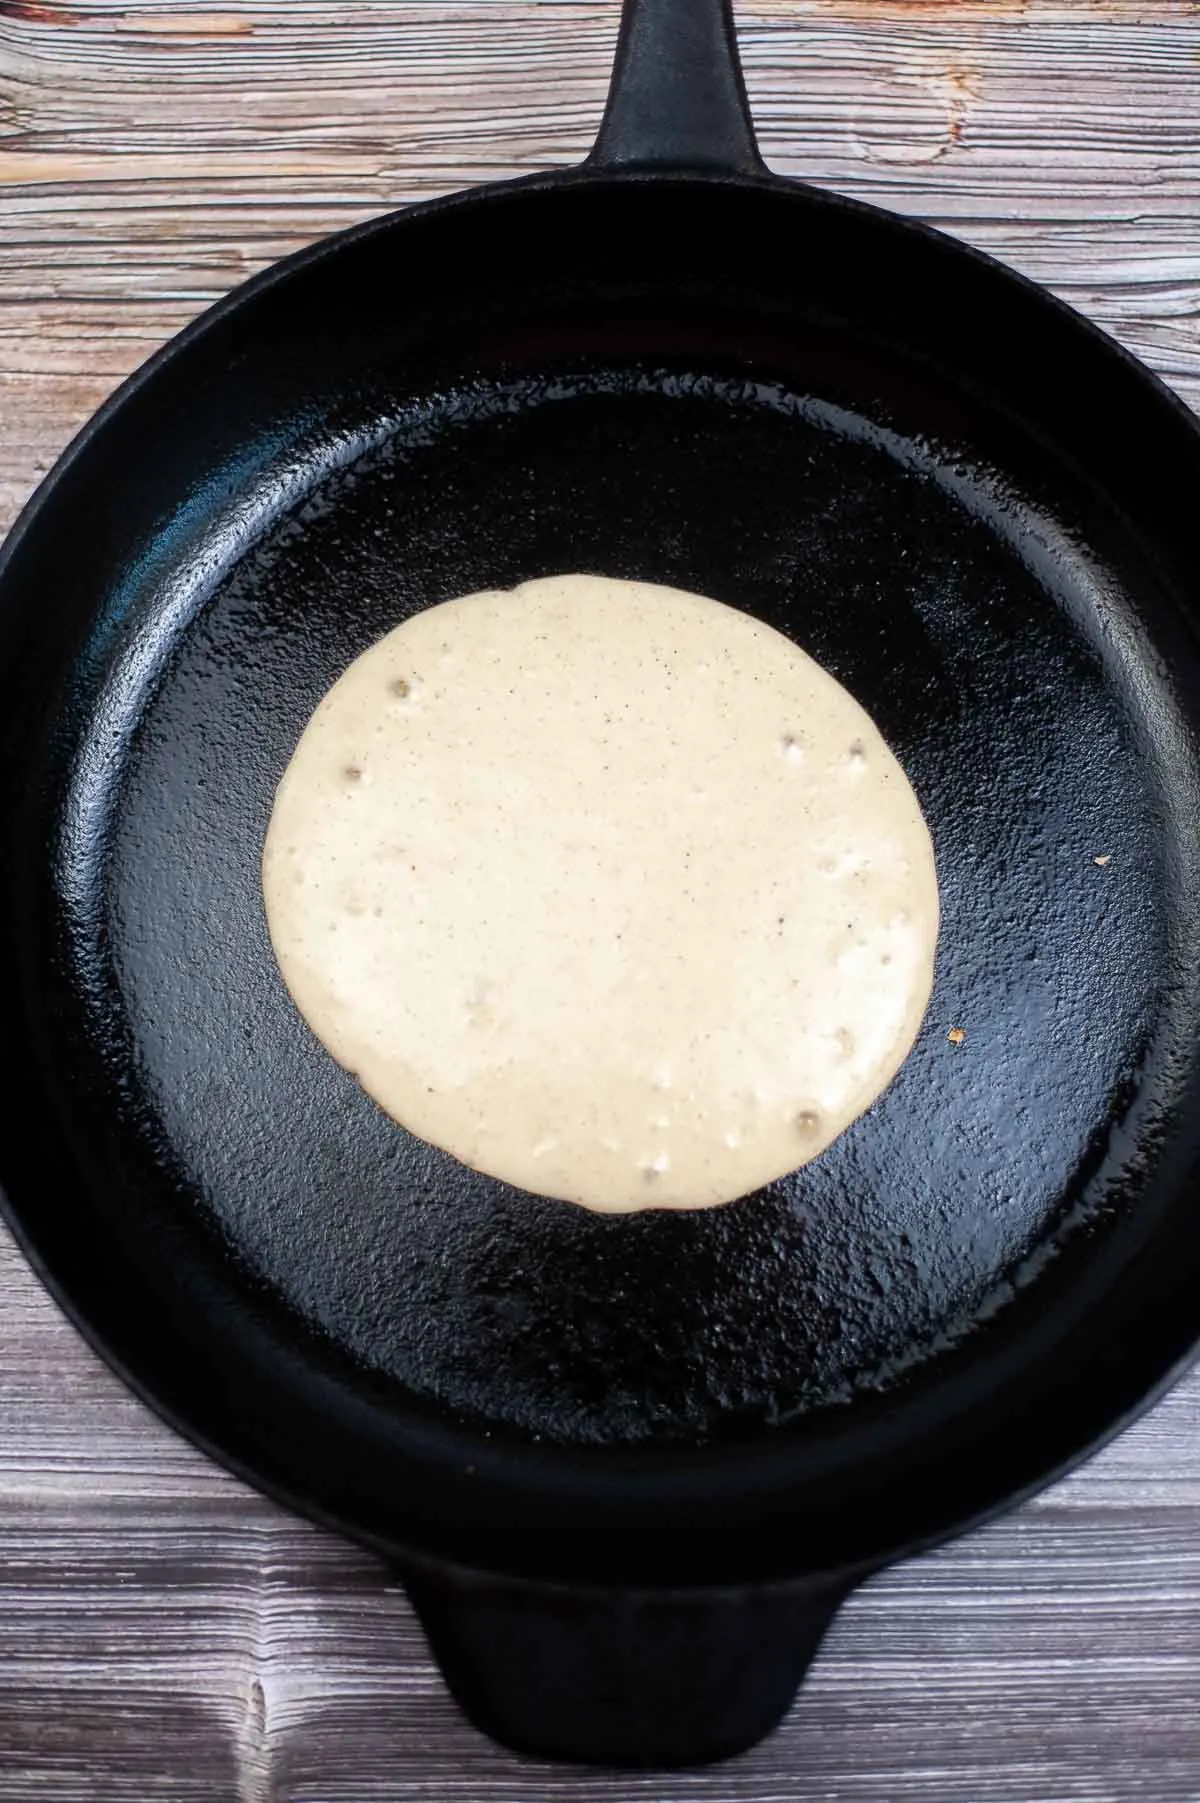 A pancake cooking in a skillet with bubbles forming.